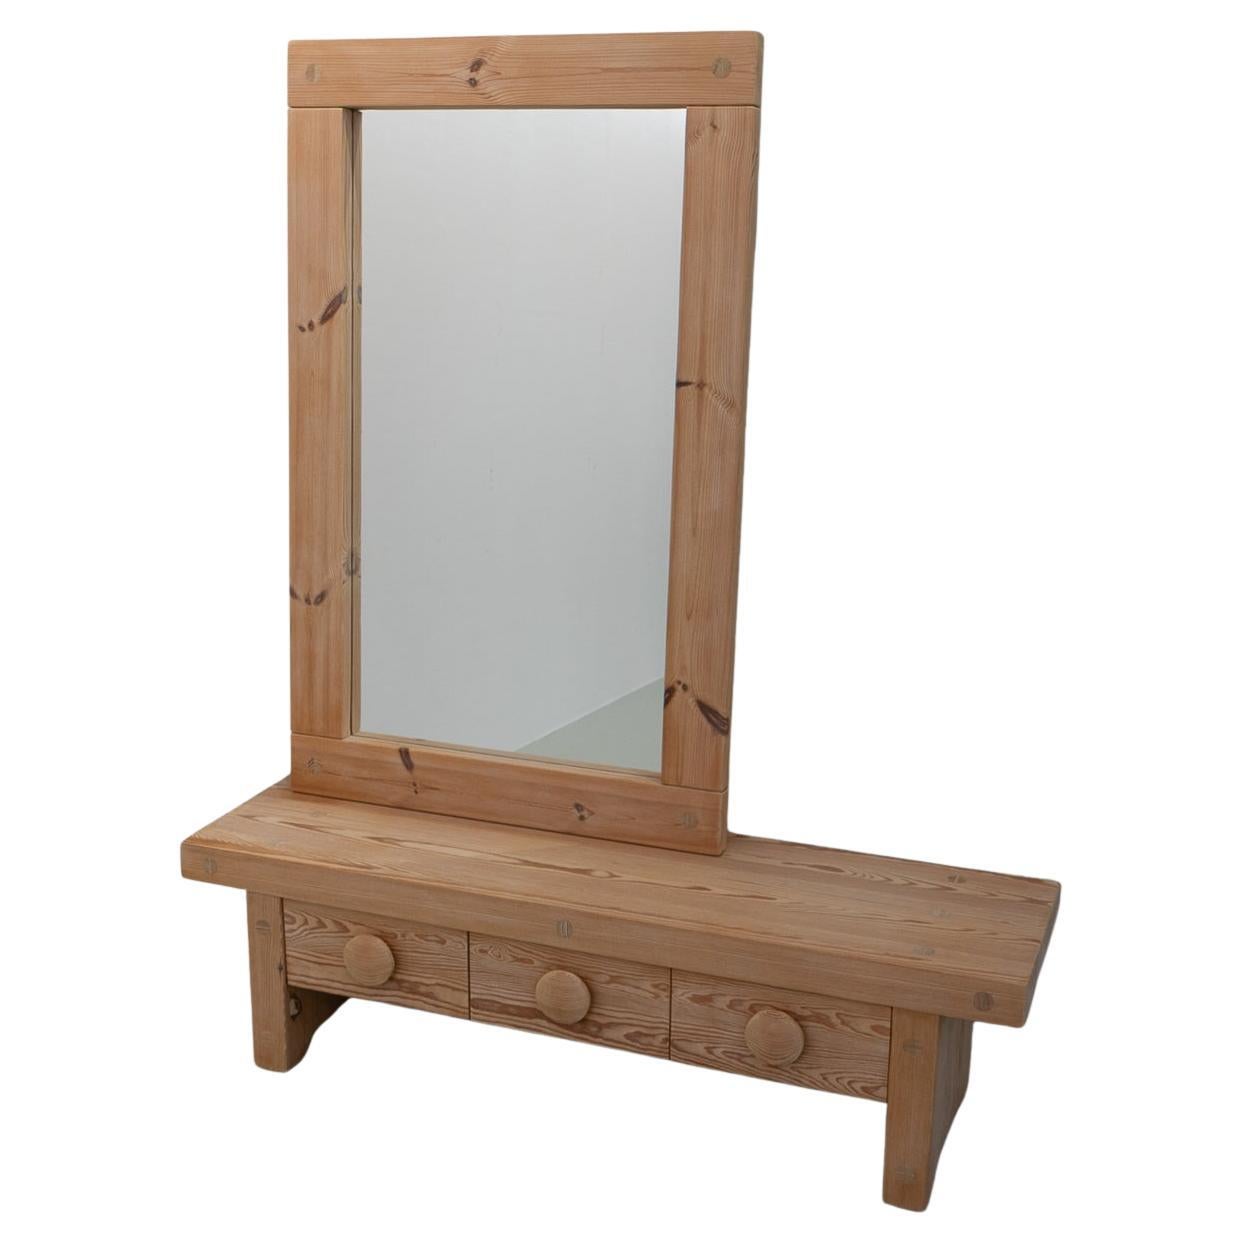 Swedish Modern Pine Bench and Mirror by Ruben Ward for Fröseke, 1970s. For Sale